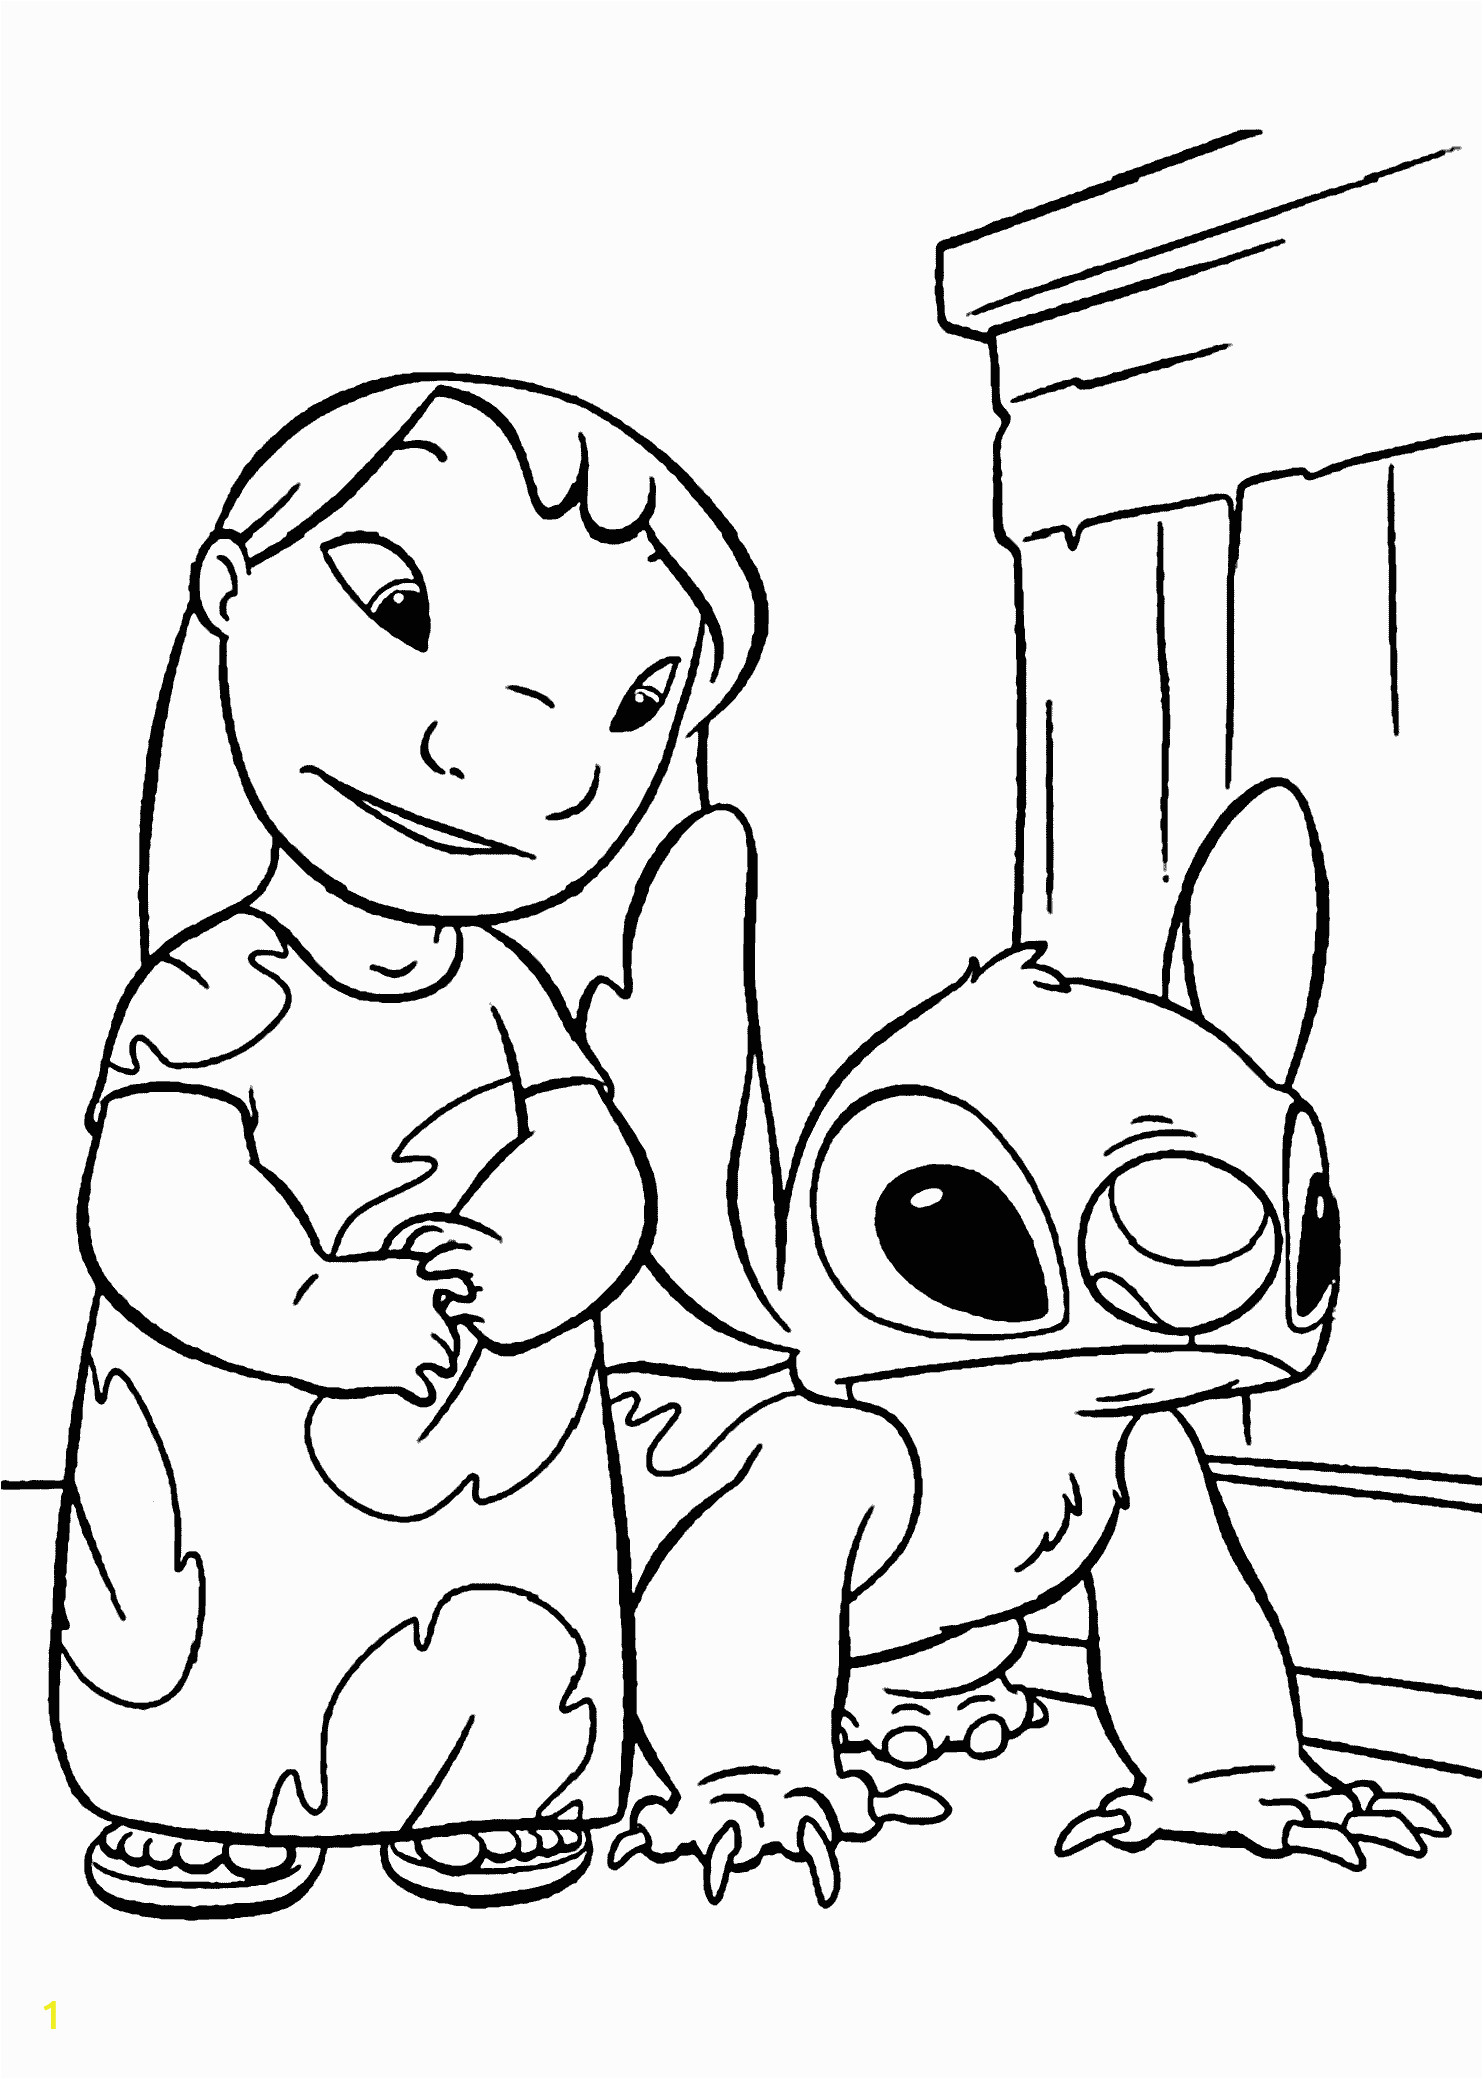 Printable Stitch Coloring Pages | divyajanani.org